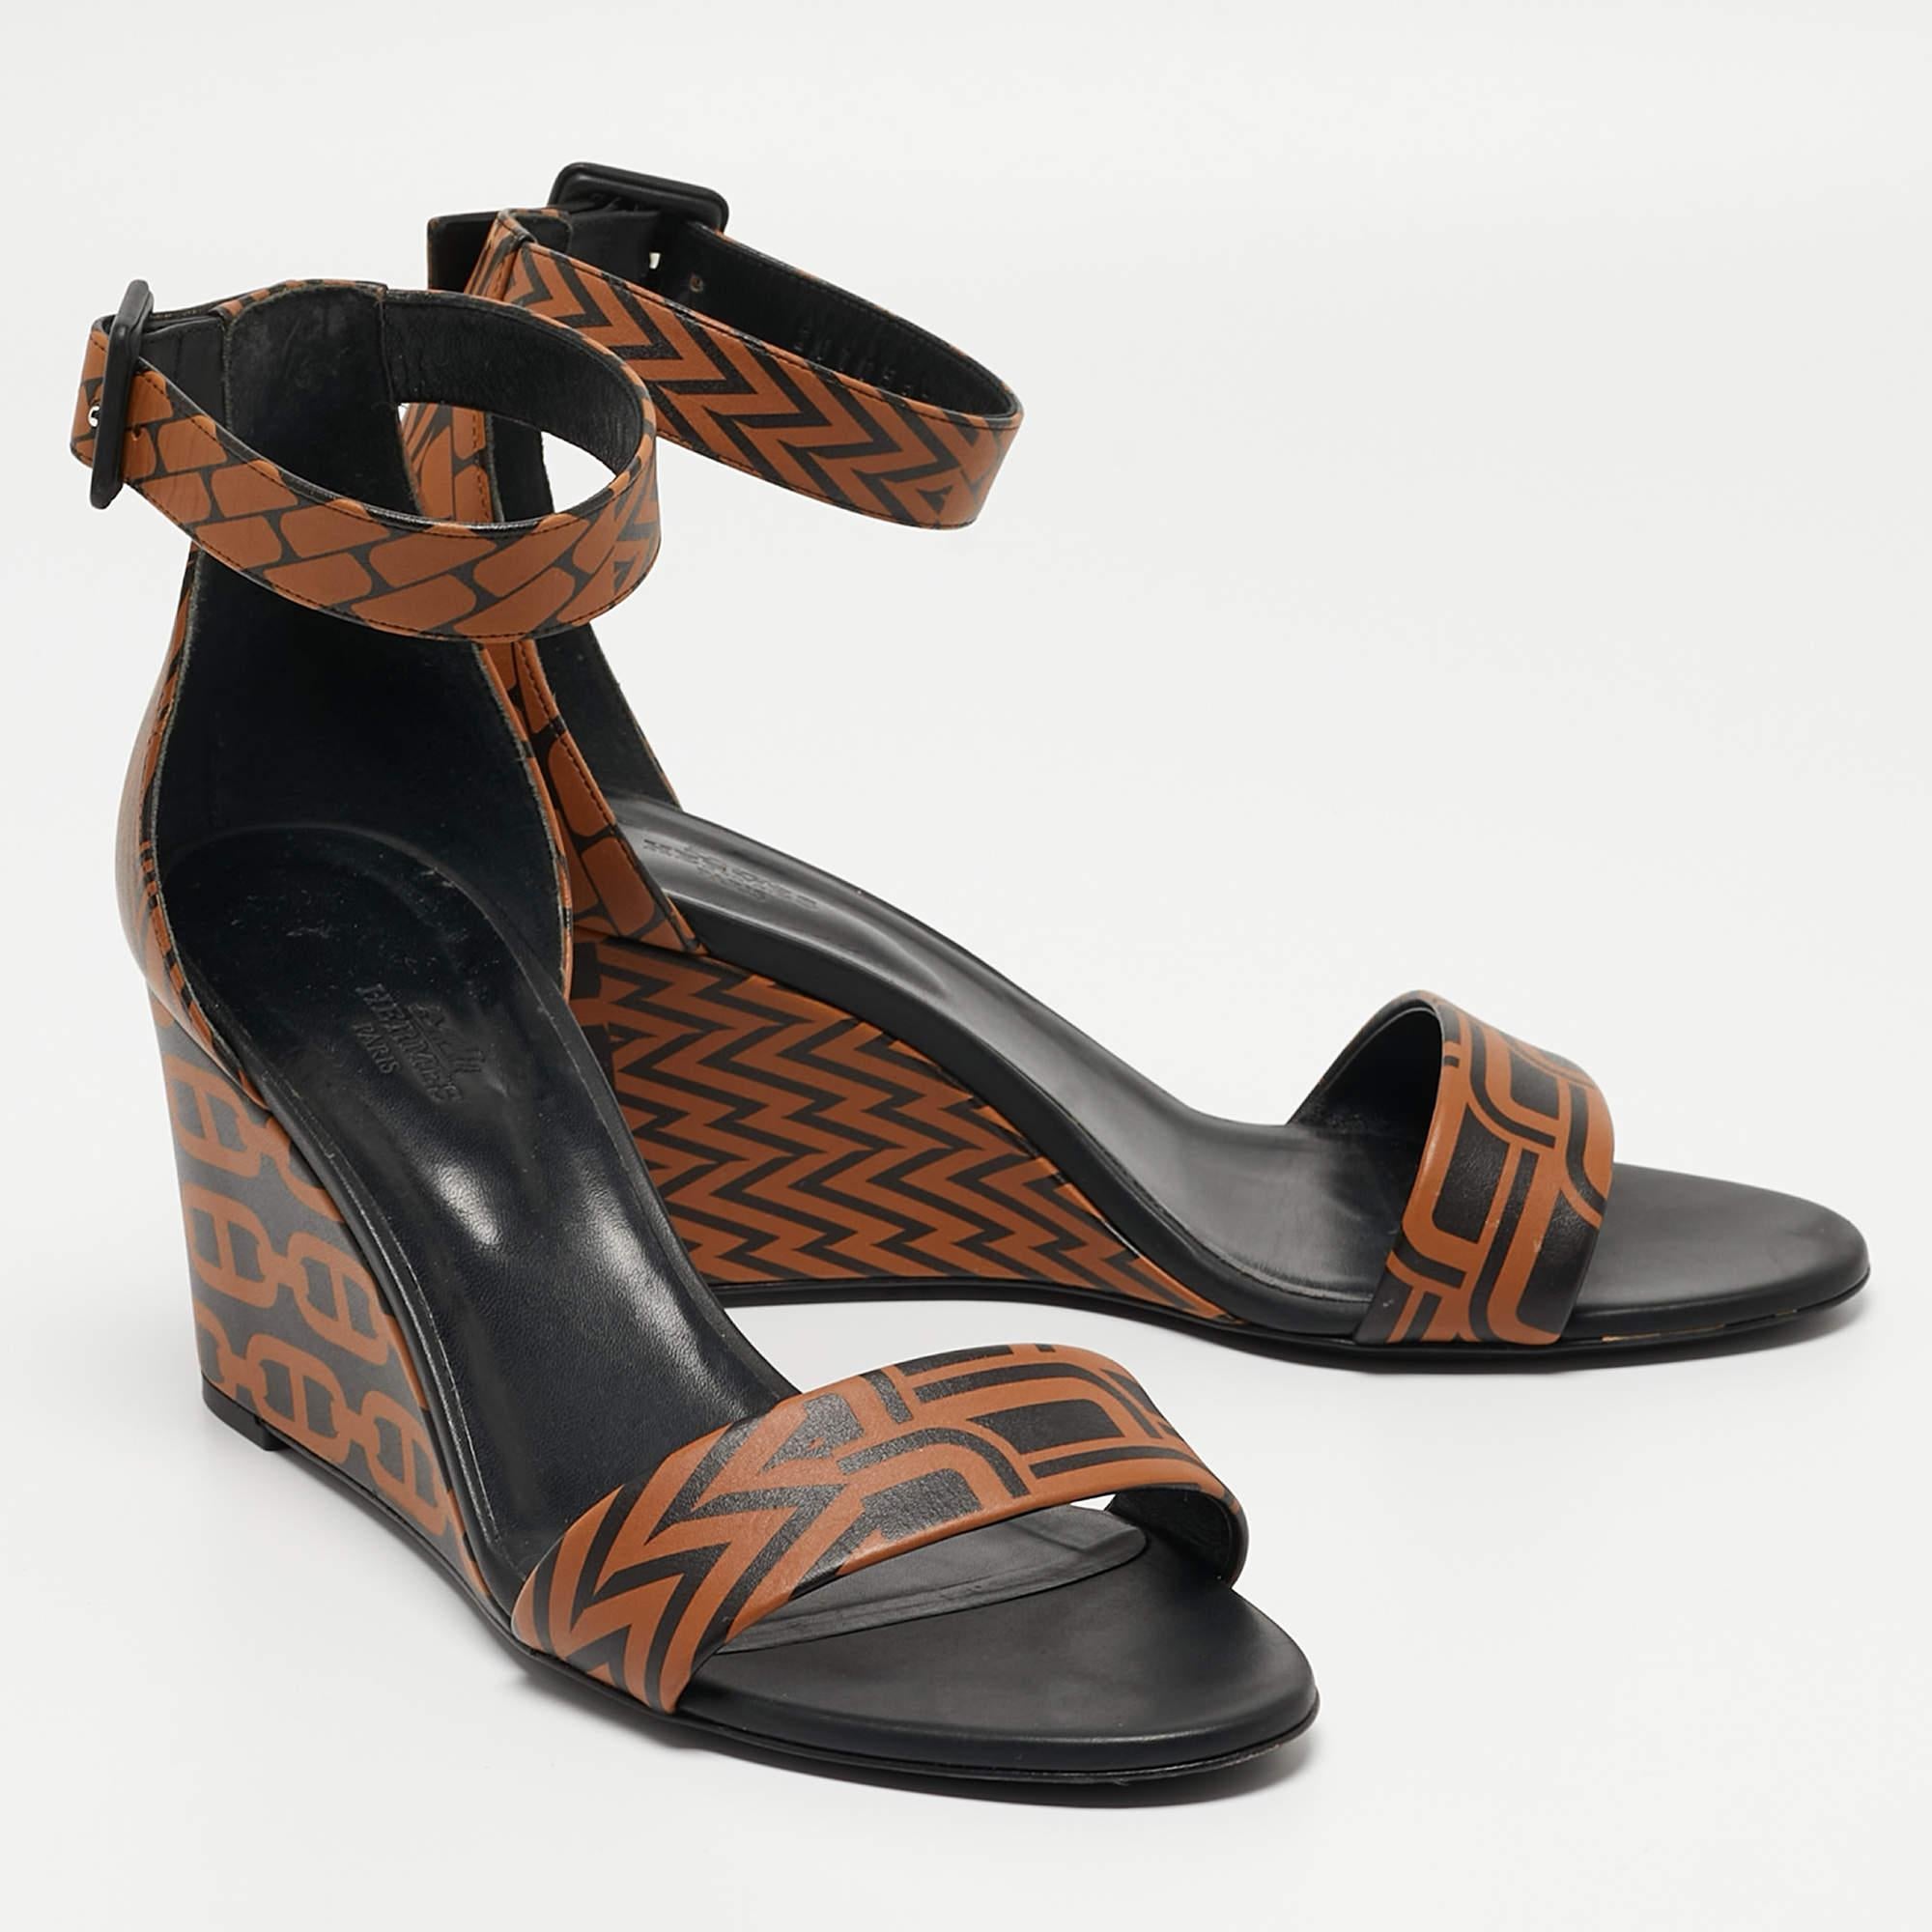 Women's Hermes Black/Brown Printed Leather Acapulco Wedge Sandals Size 40